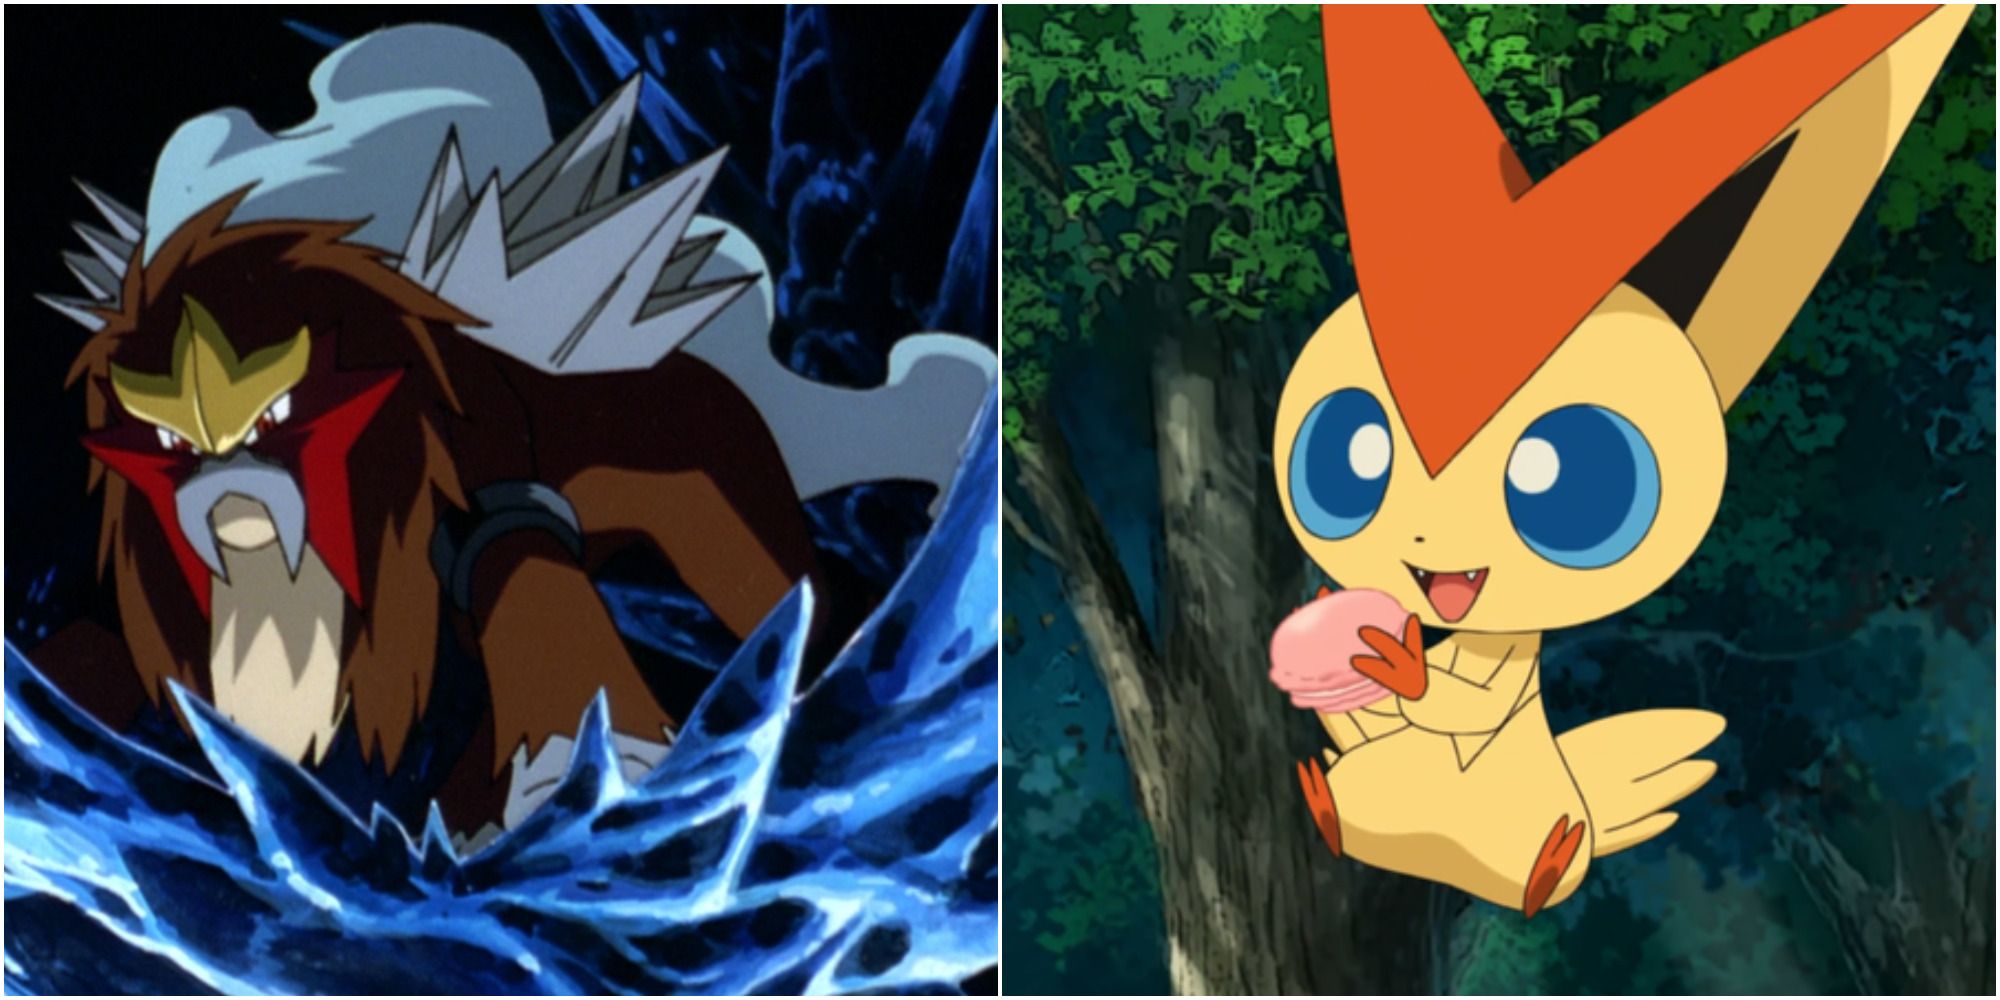 Pokemon: Every Legendary And Mythical Fire-Type, Ranked